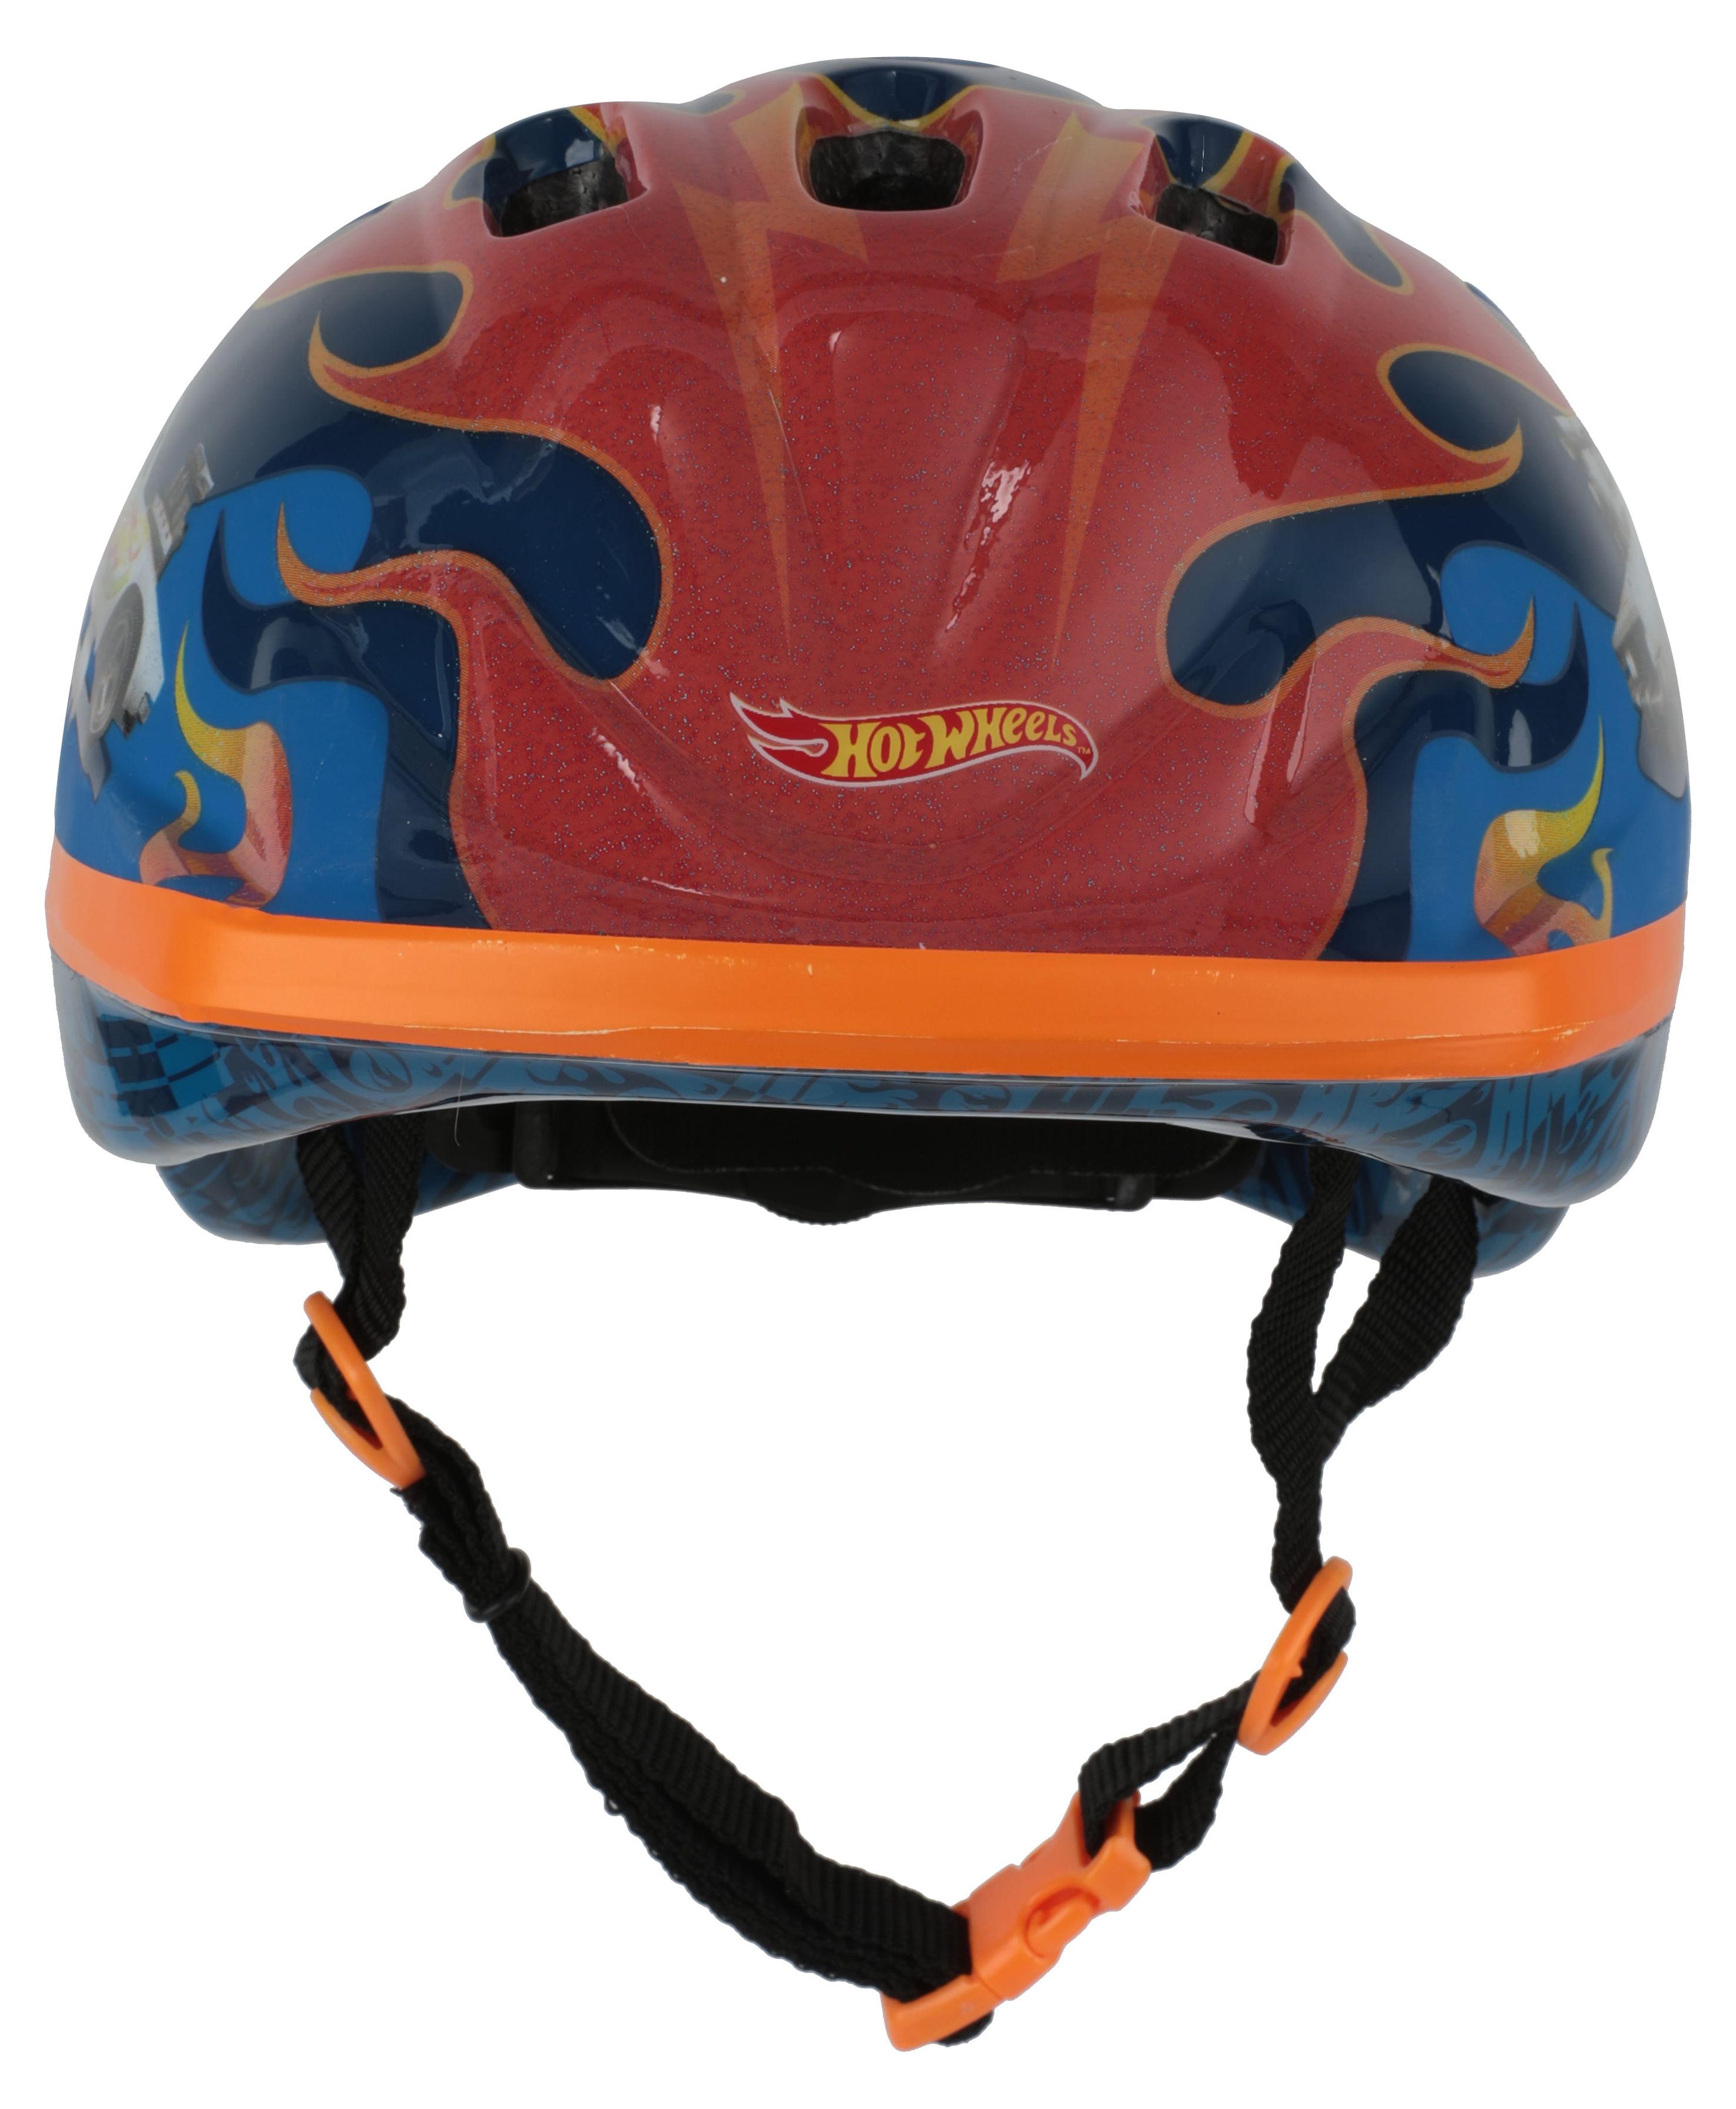 Hot Wheels Helmet with Surprise Bonus Car for Bikes, Skateboards and Scooters, Ages 5+ - image 6 of 10